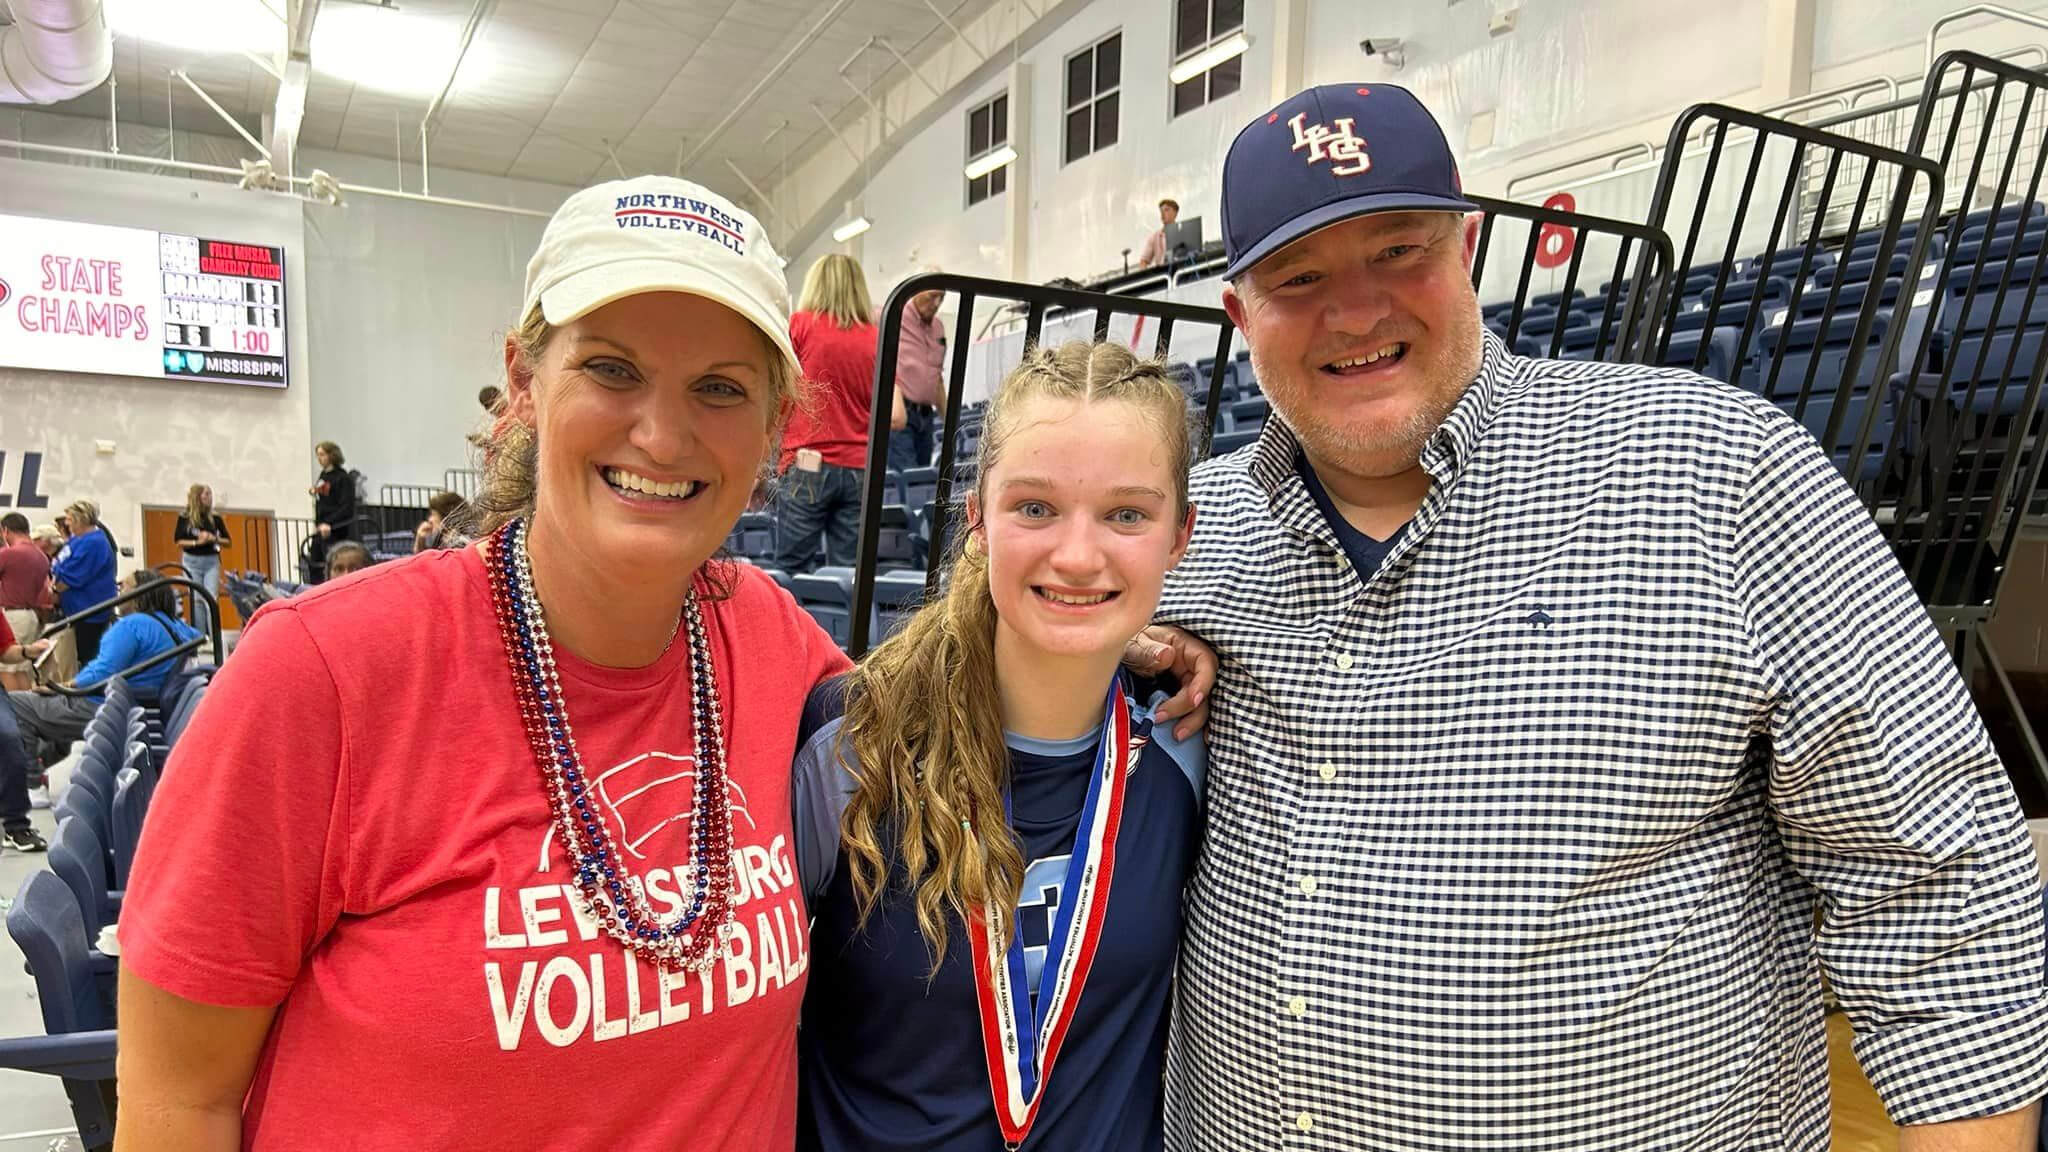 MHSAA feature: Like father, like daughter